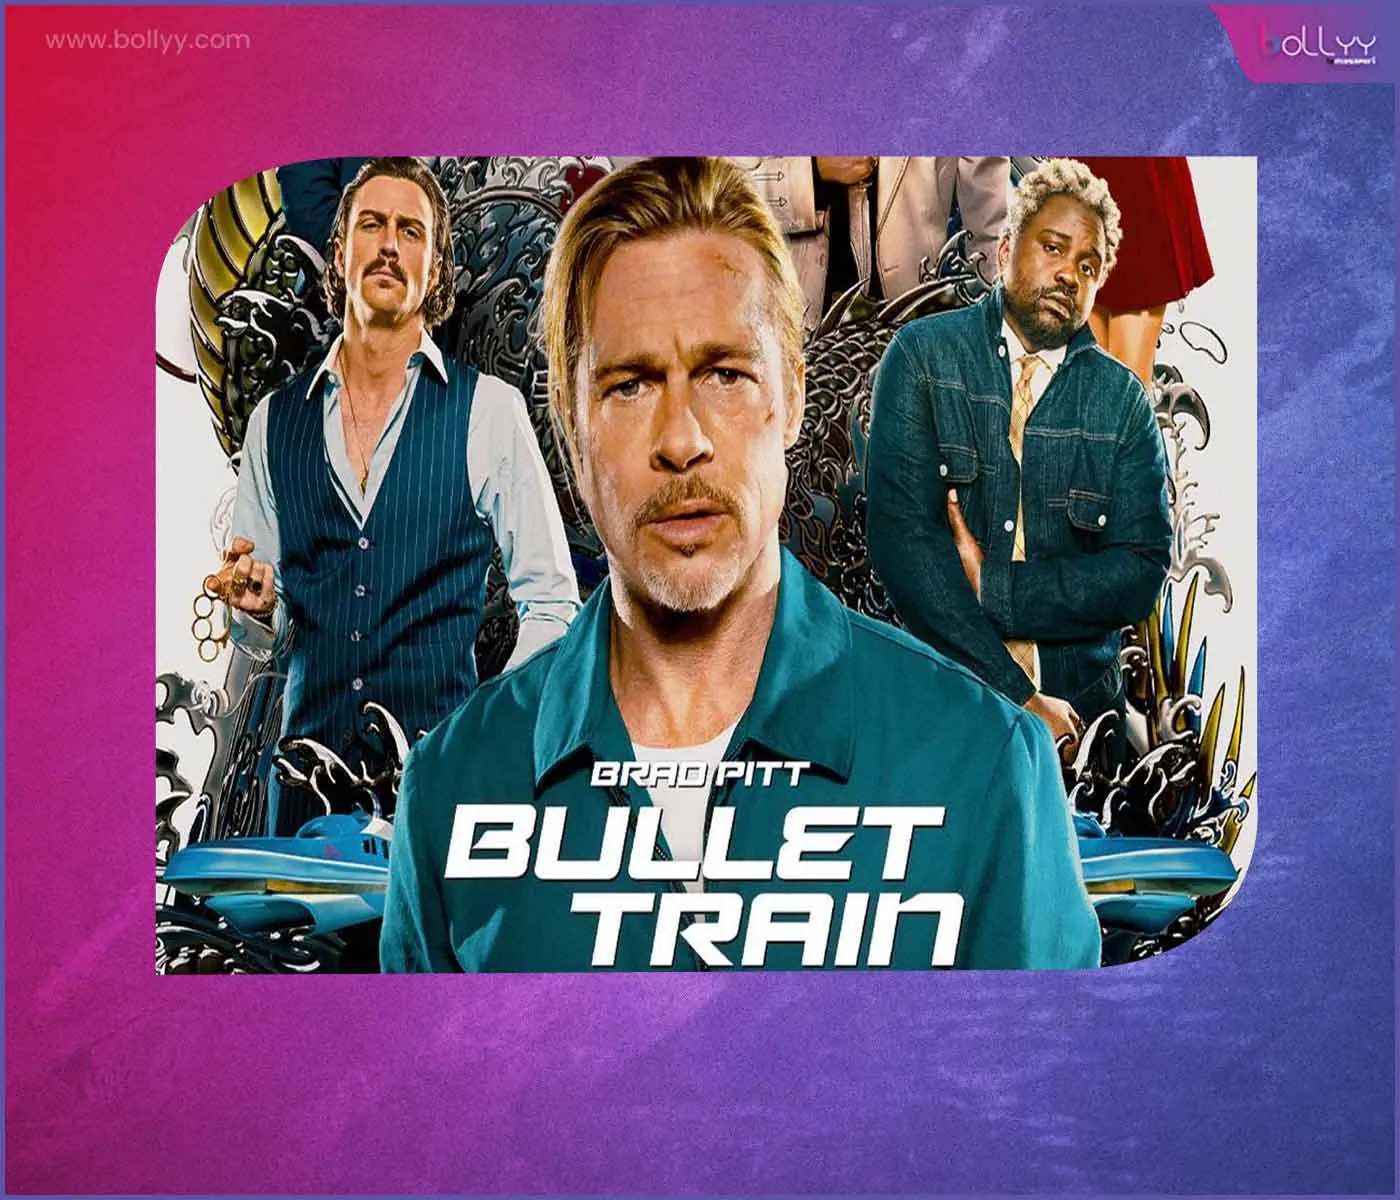 Indian Television Premiere of Bullet Train